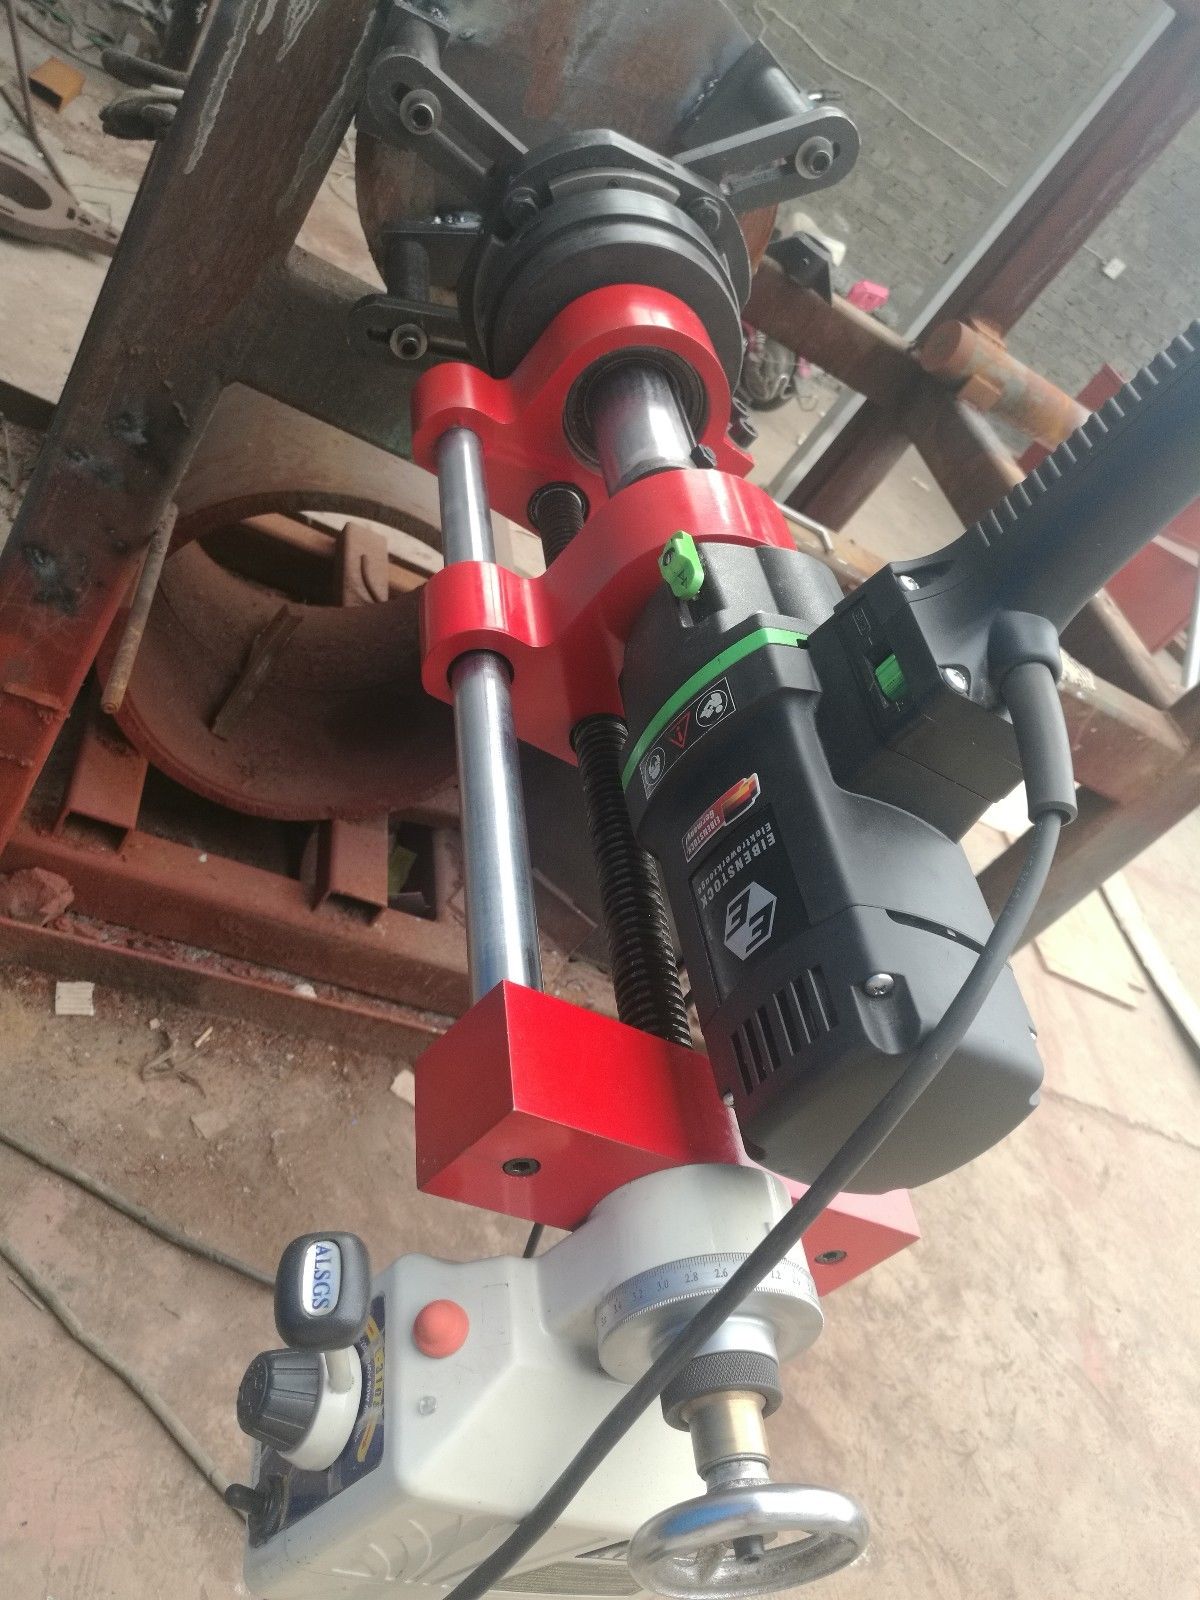  Portable-Line-Boring-Machine-for-Repairing-holes-and-bores-high-quality-YK60 Portable-Line-Boring-Machine-for-Repairing-holes-and-bores-high-quality-YK60 